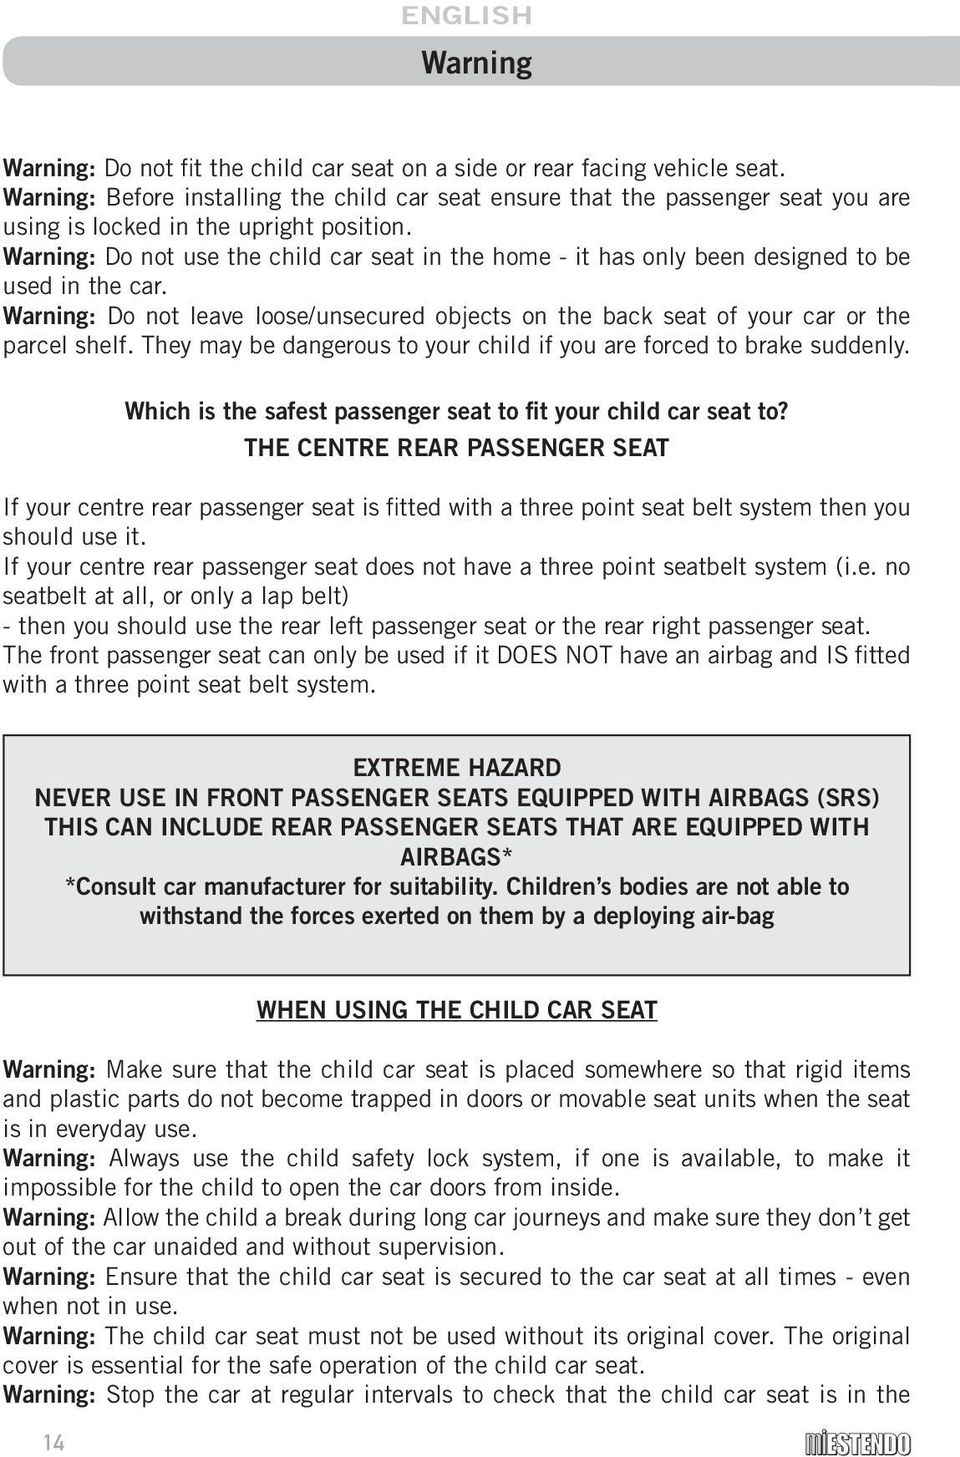 Warning: Do not use the child car seat in the home - it has only been designed to be used in the car. Warning: Do not leave loose/unsecured objects on the back seat of your car or the parcel shelf.